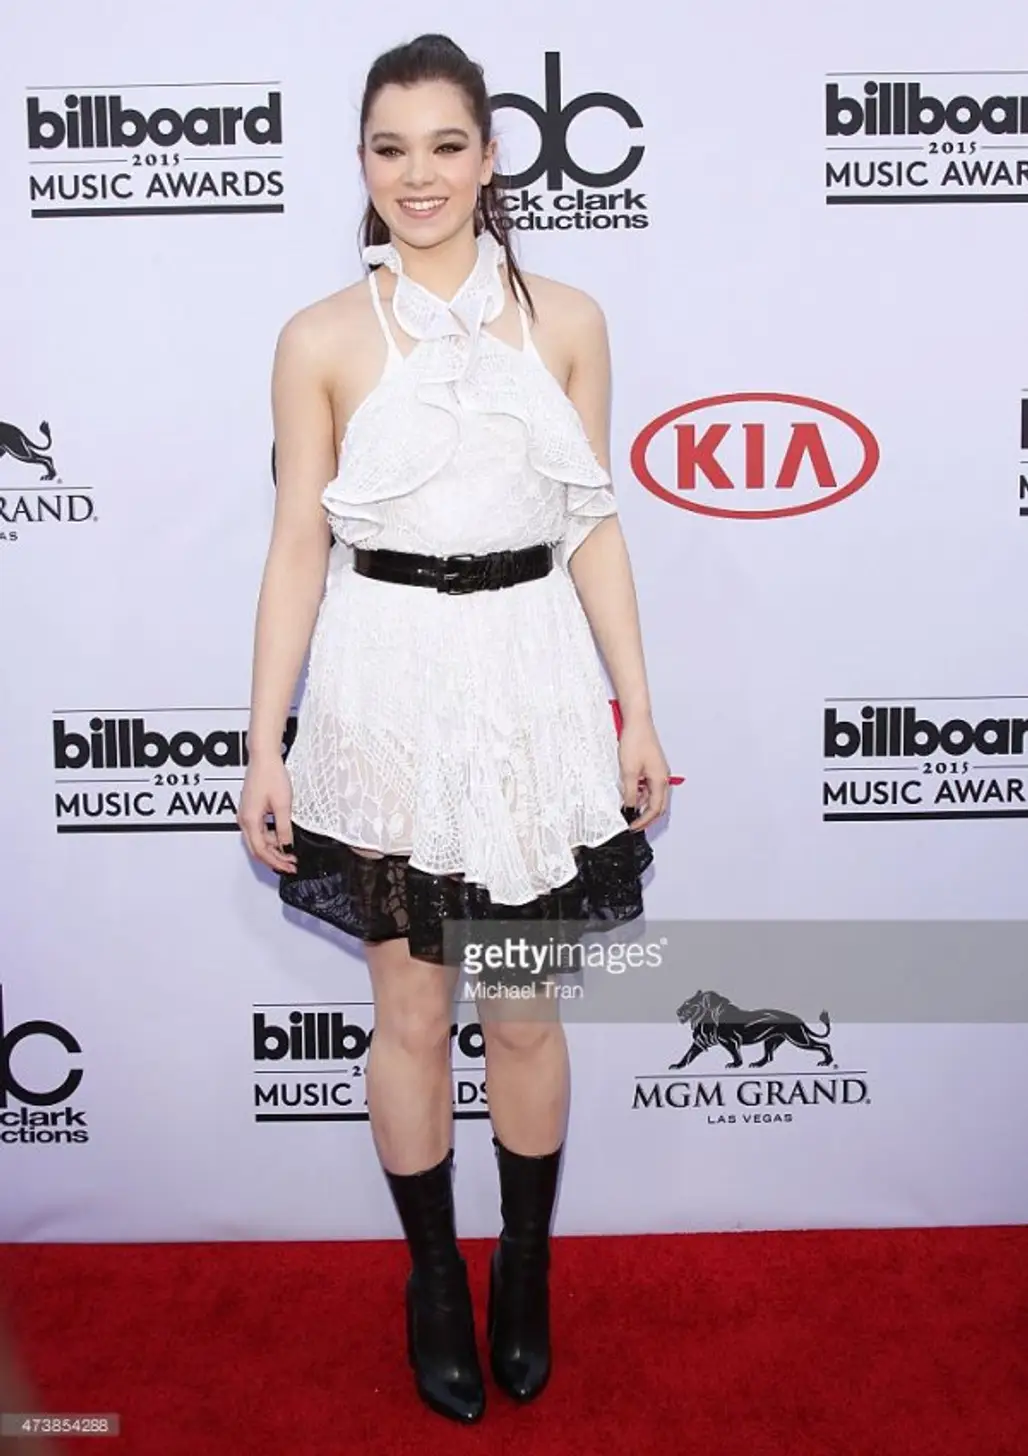 Hailee Steinfeld Didn't Quite Hit the Mark in This Givenchy Crochet Dress